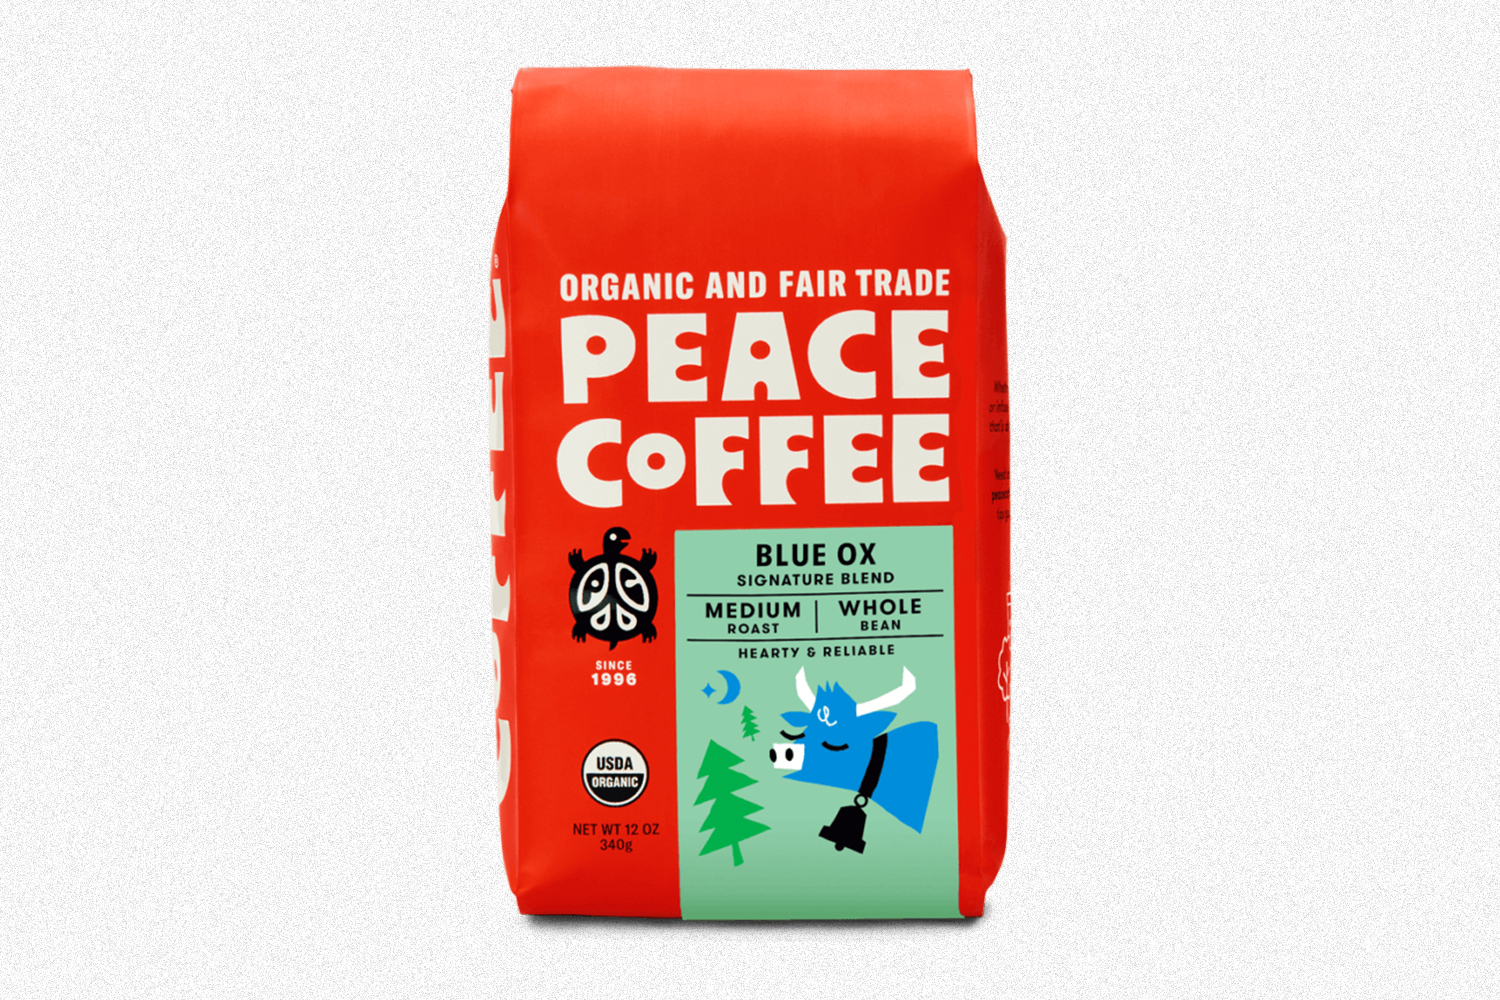 A bag of Blue Ox beans from Peace Coffee